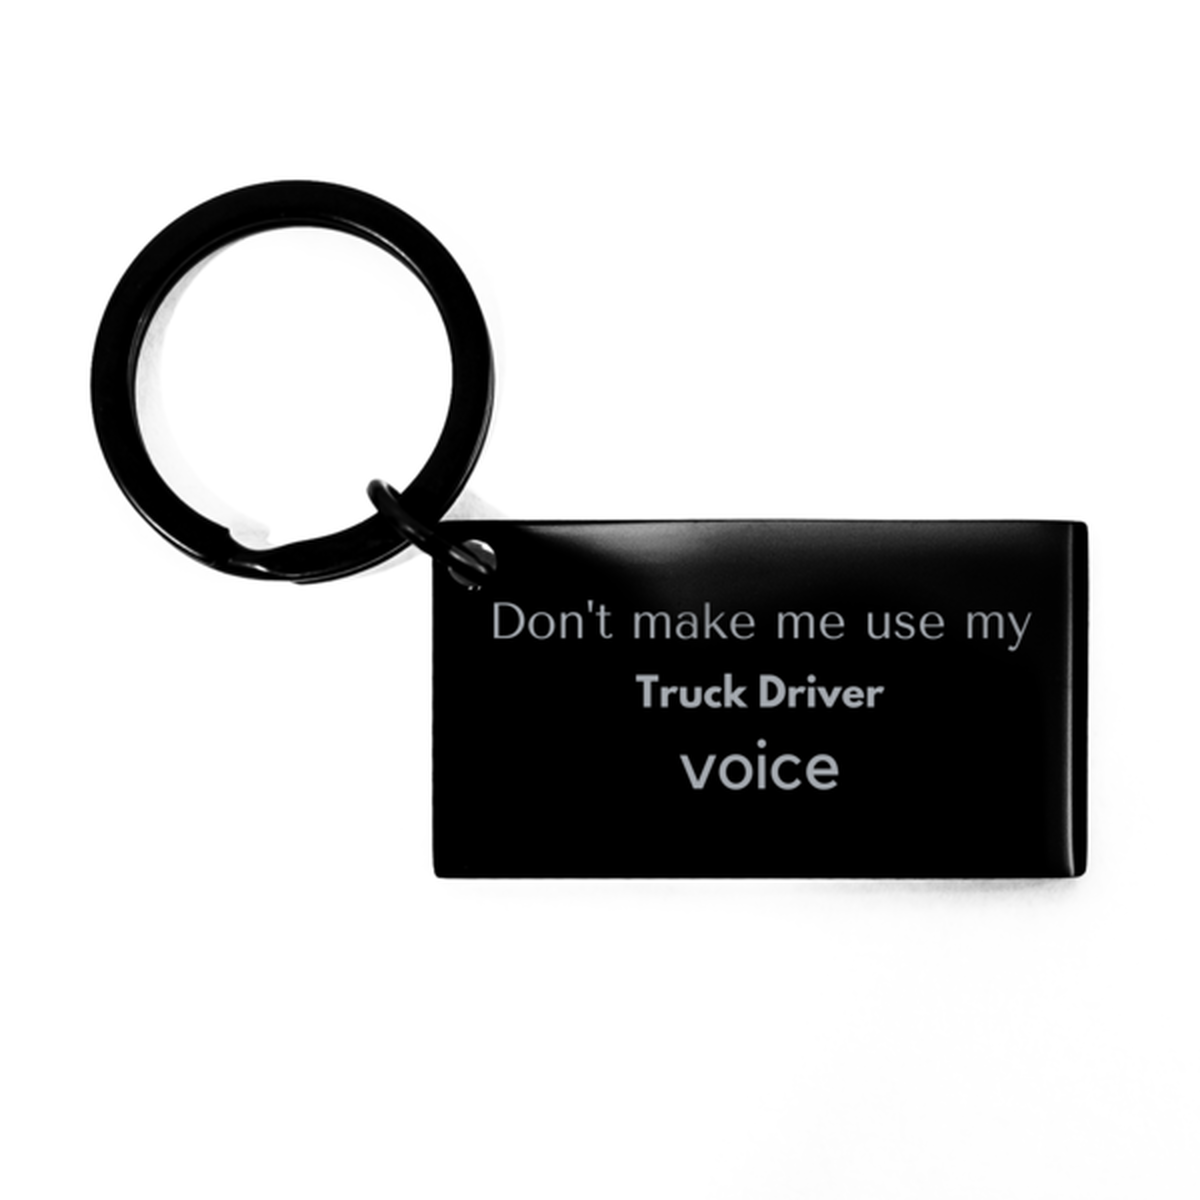 Don't make me use my Truck Driver voice, Sarcasm Truck Driver Gifts, Christmas Truck Driver Keychain Birthday Unique Gifts For Truck Driver Coworkers, Men, Women, Colleague, Friends